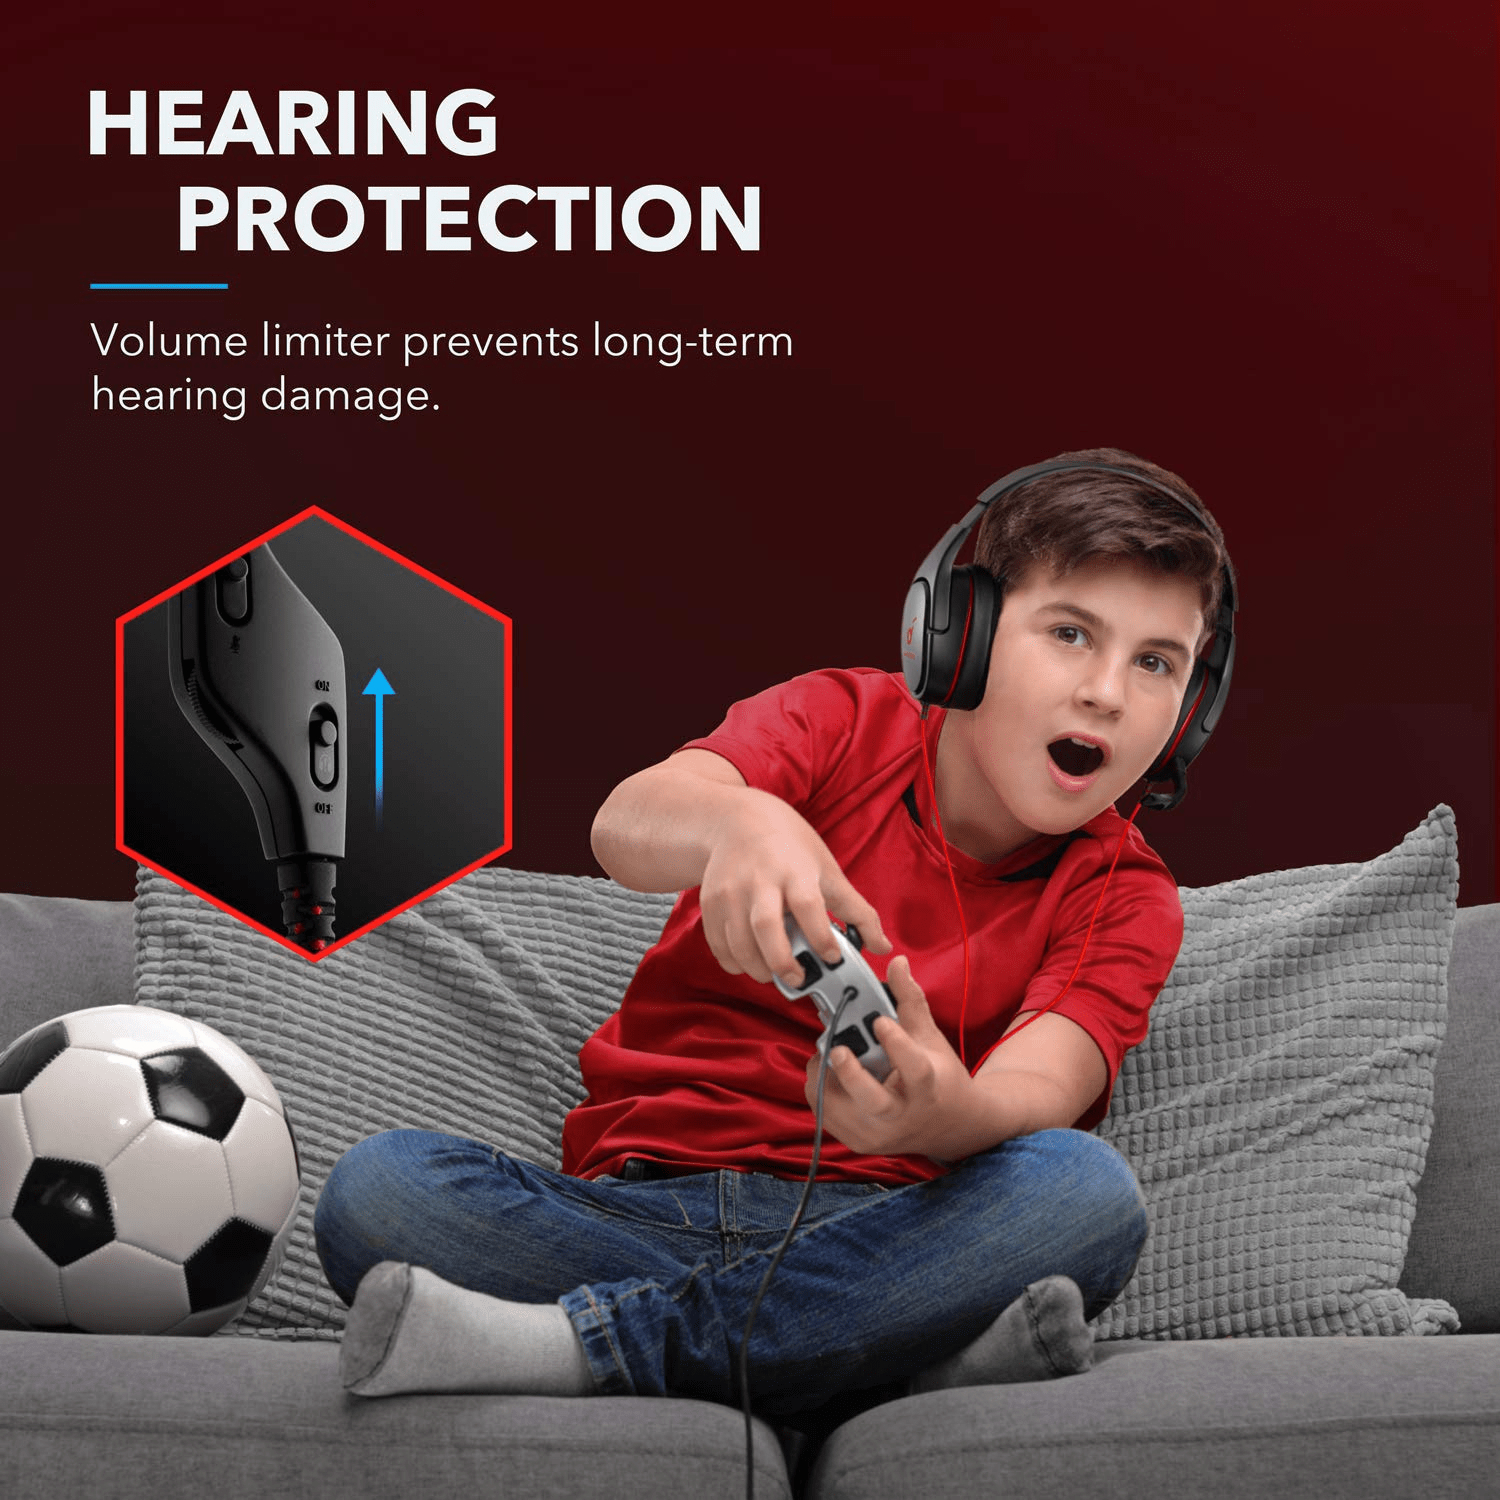 Anker Soundcore Strike 1 Gaming Headset for FPS Games, Noise Isolating Mic, and Cooling Gel-Infused Cushions